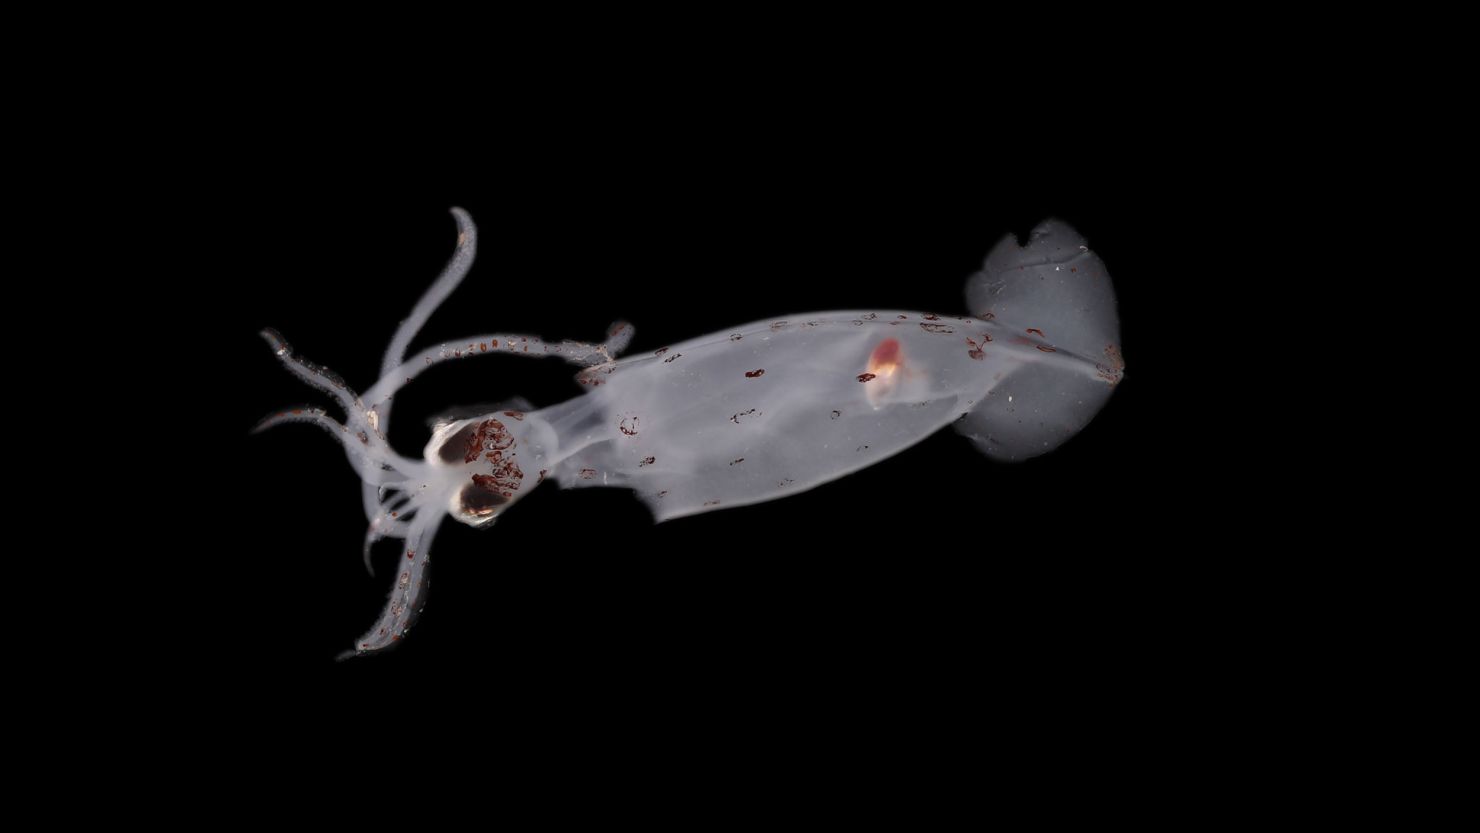 Scientists spotted an elusive deep-sea squid that could be new to science during a February expedition by Ocean Census to the Bounty Trough, off the coast of New Zealand.